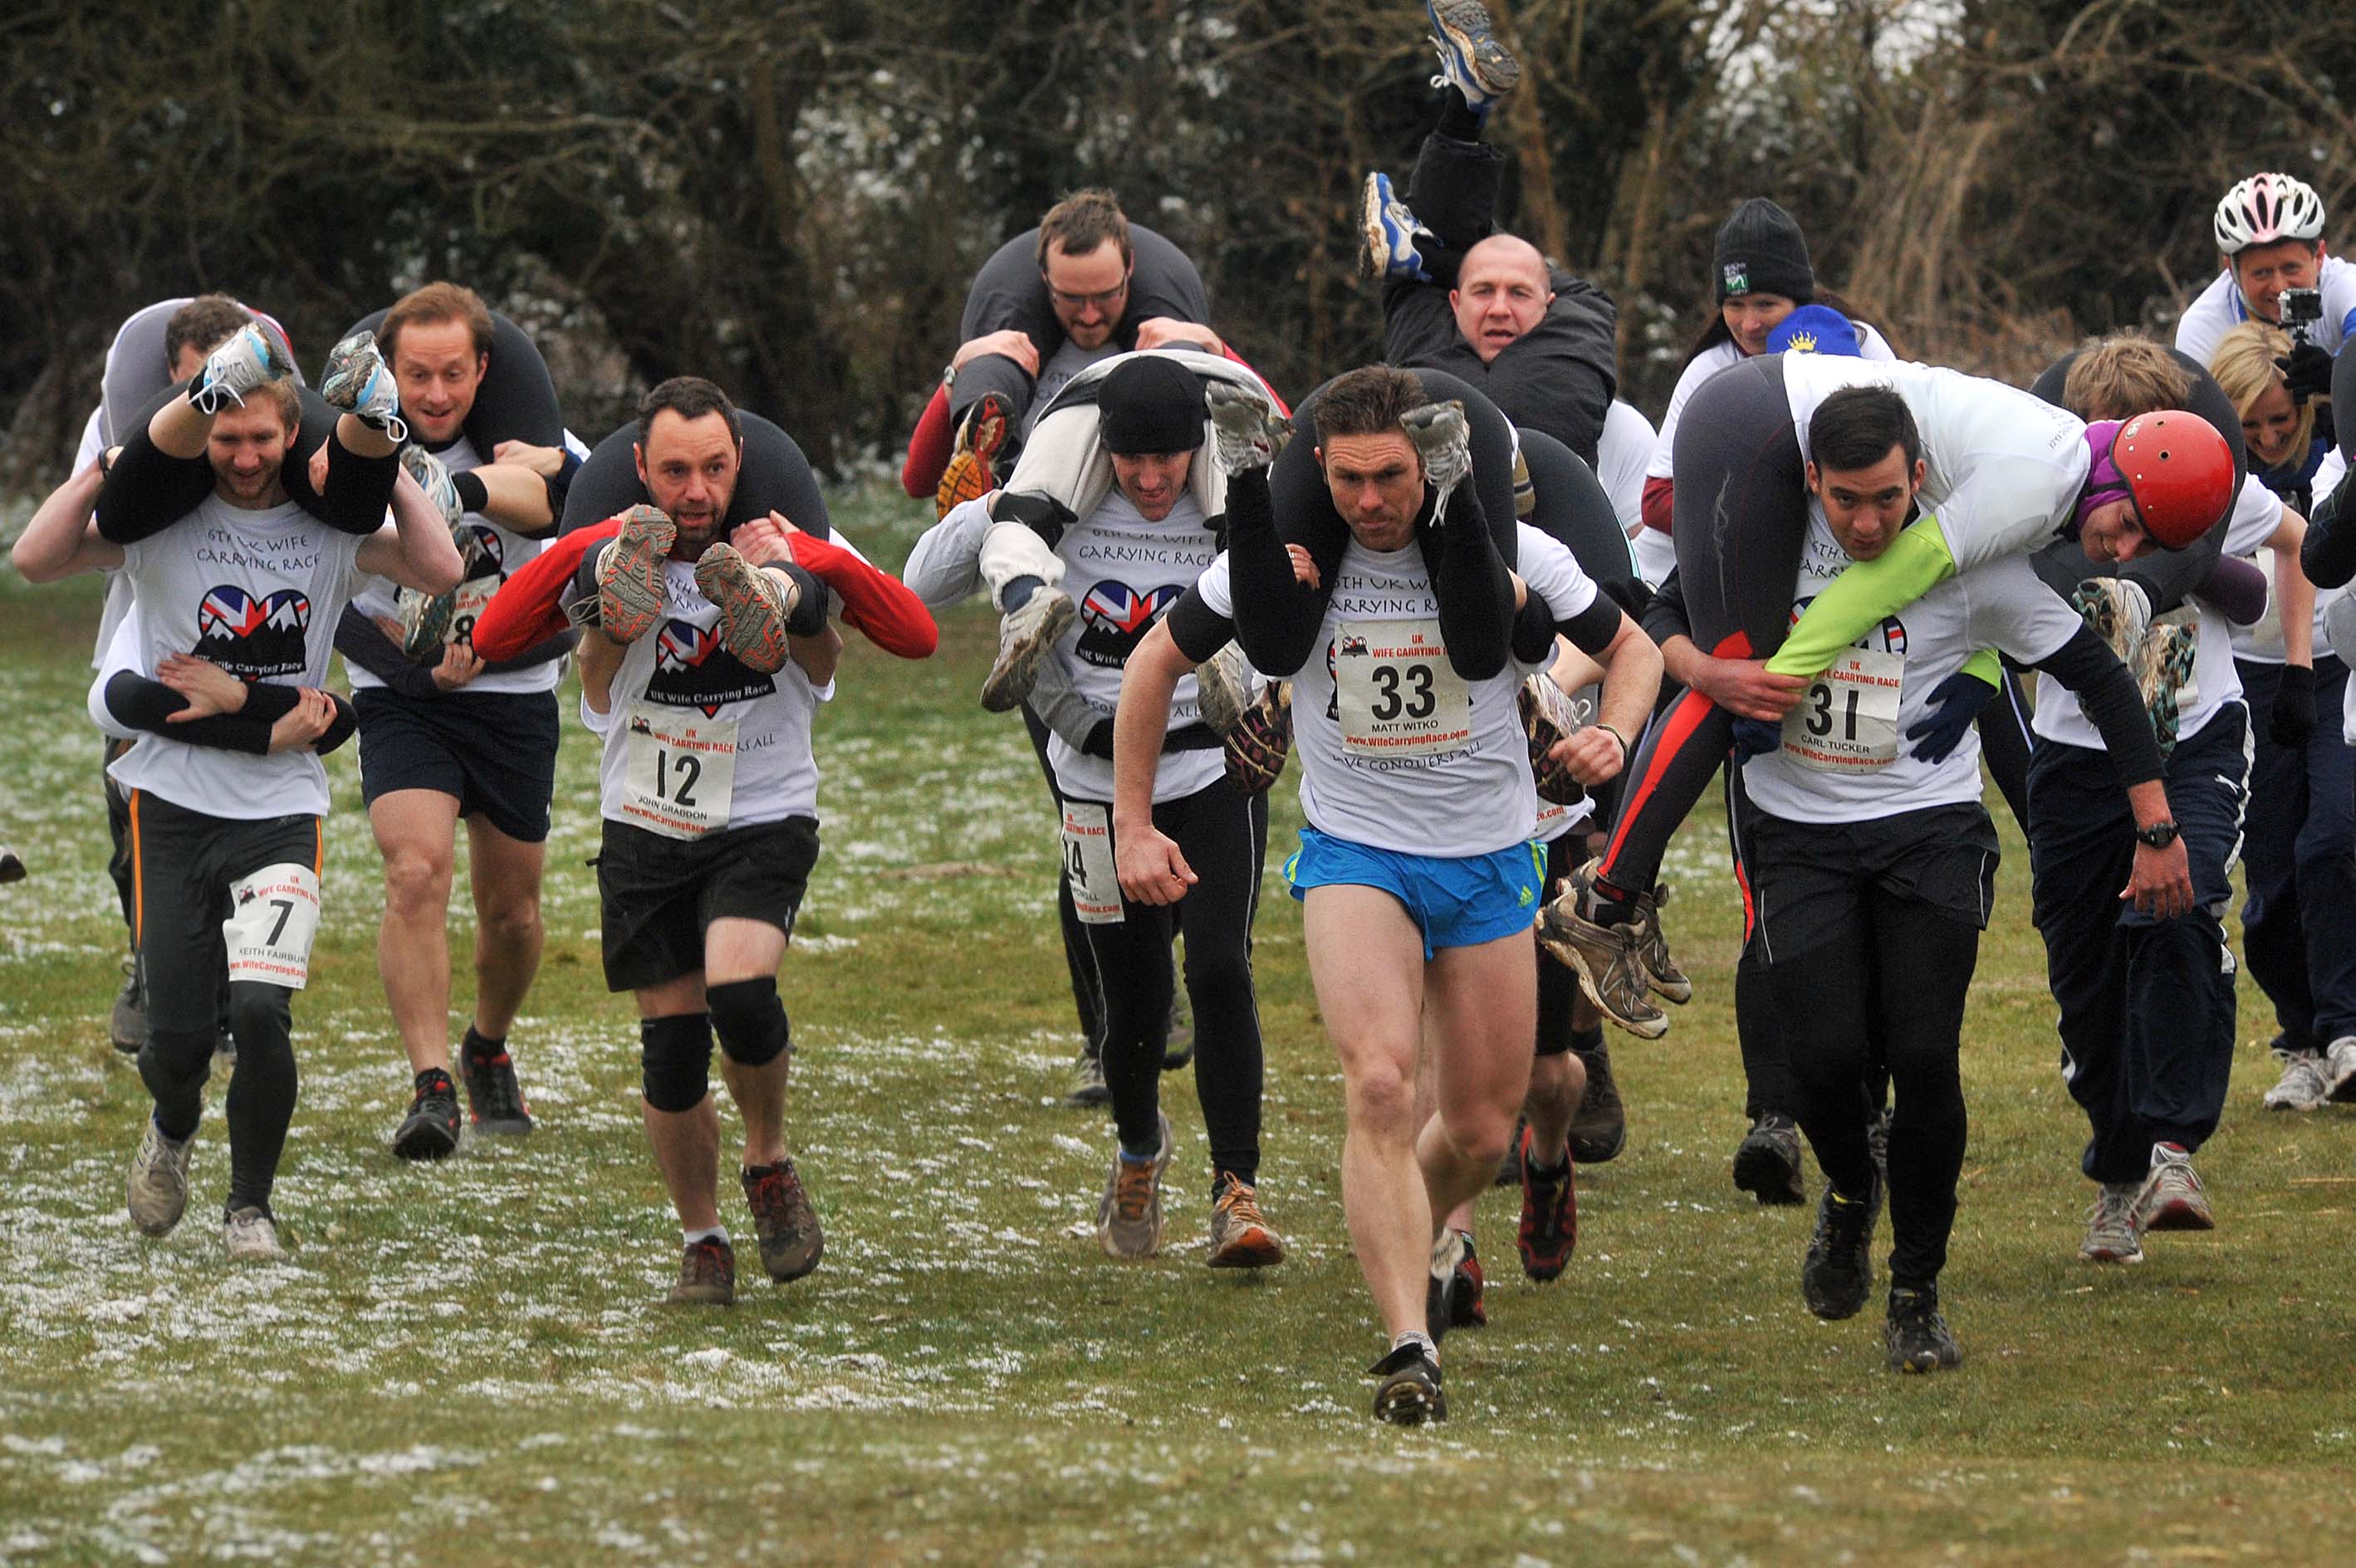 World's quirkiest events wife carrying championships